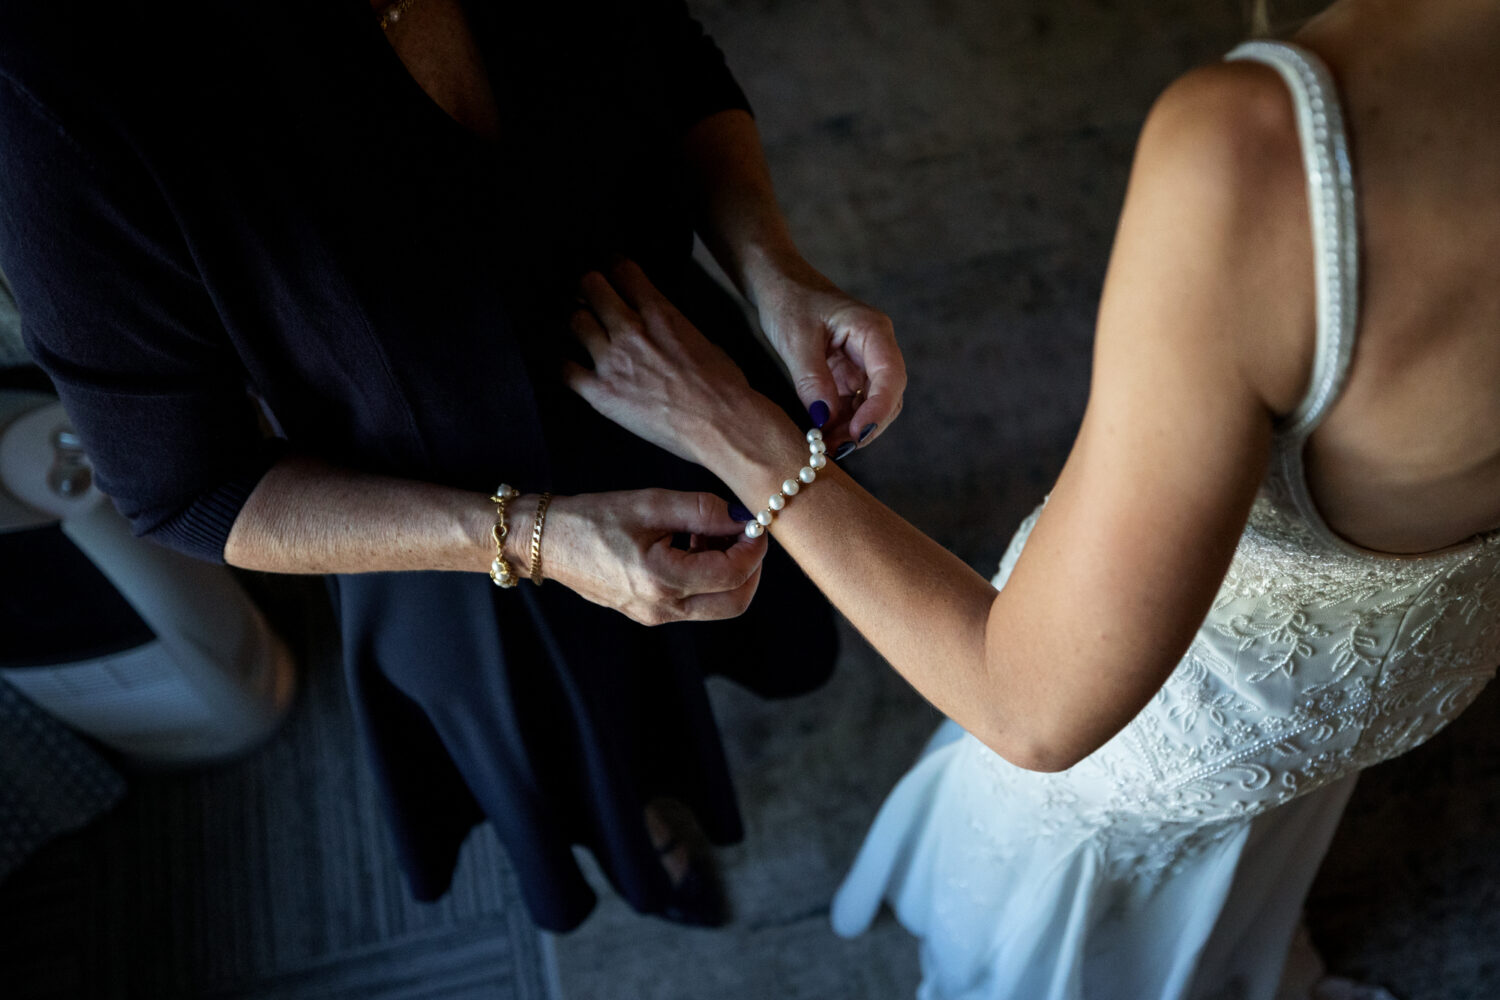 Helping the bride with a bracelet of large pearls.